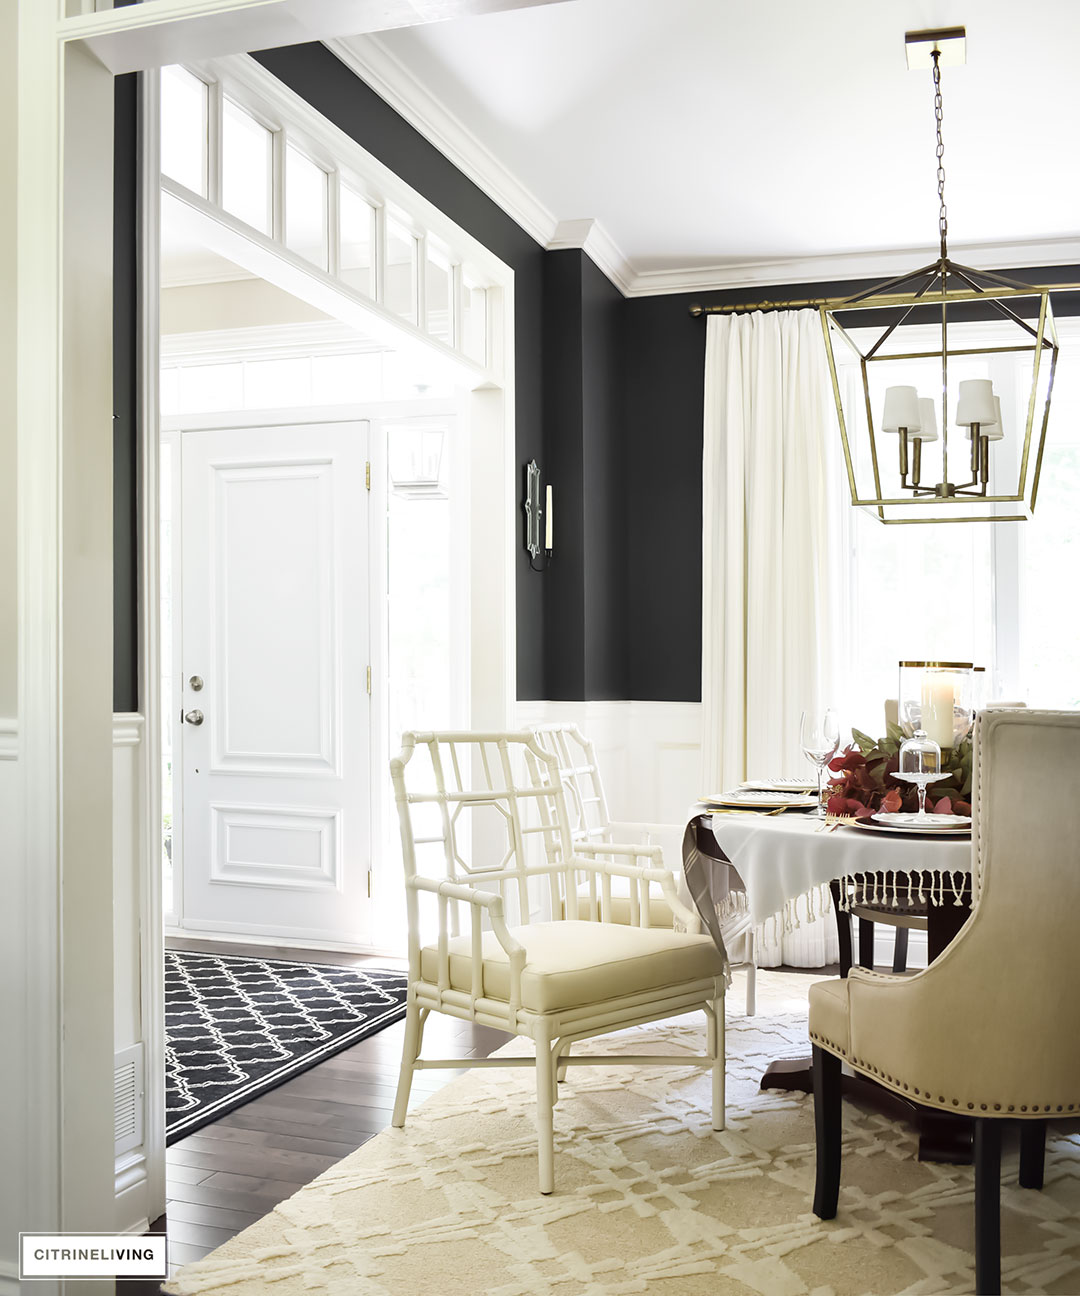 Dining room with black walls, white drapes, transoms.